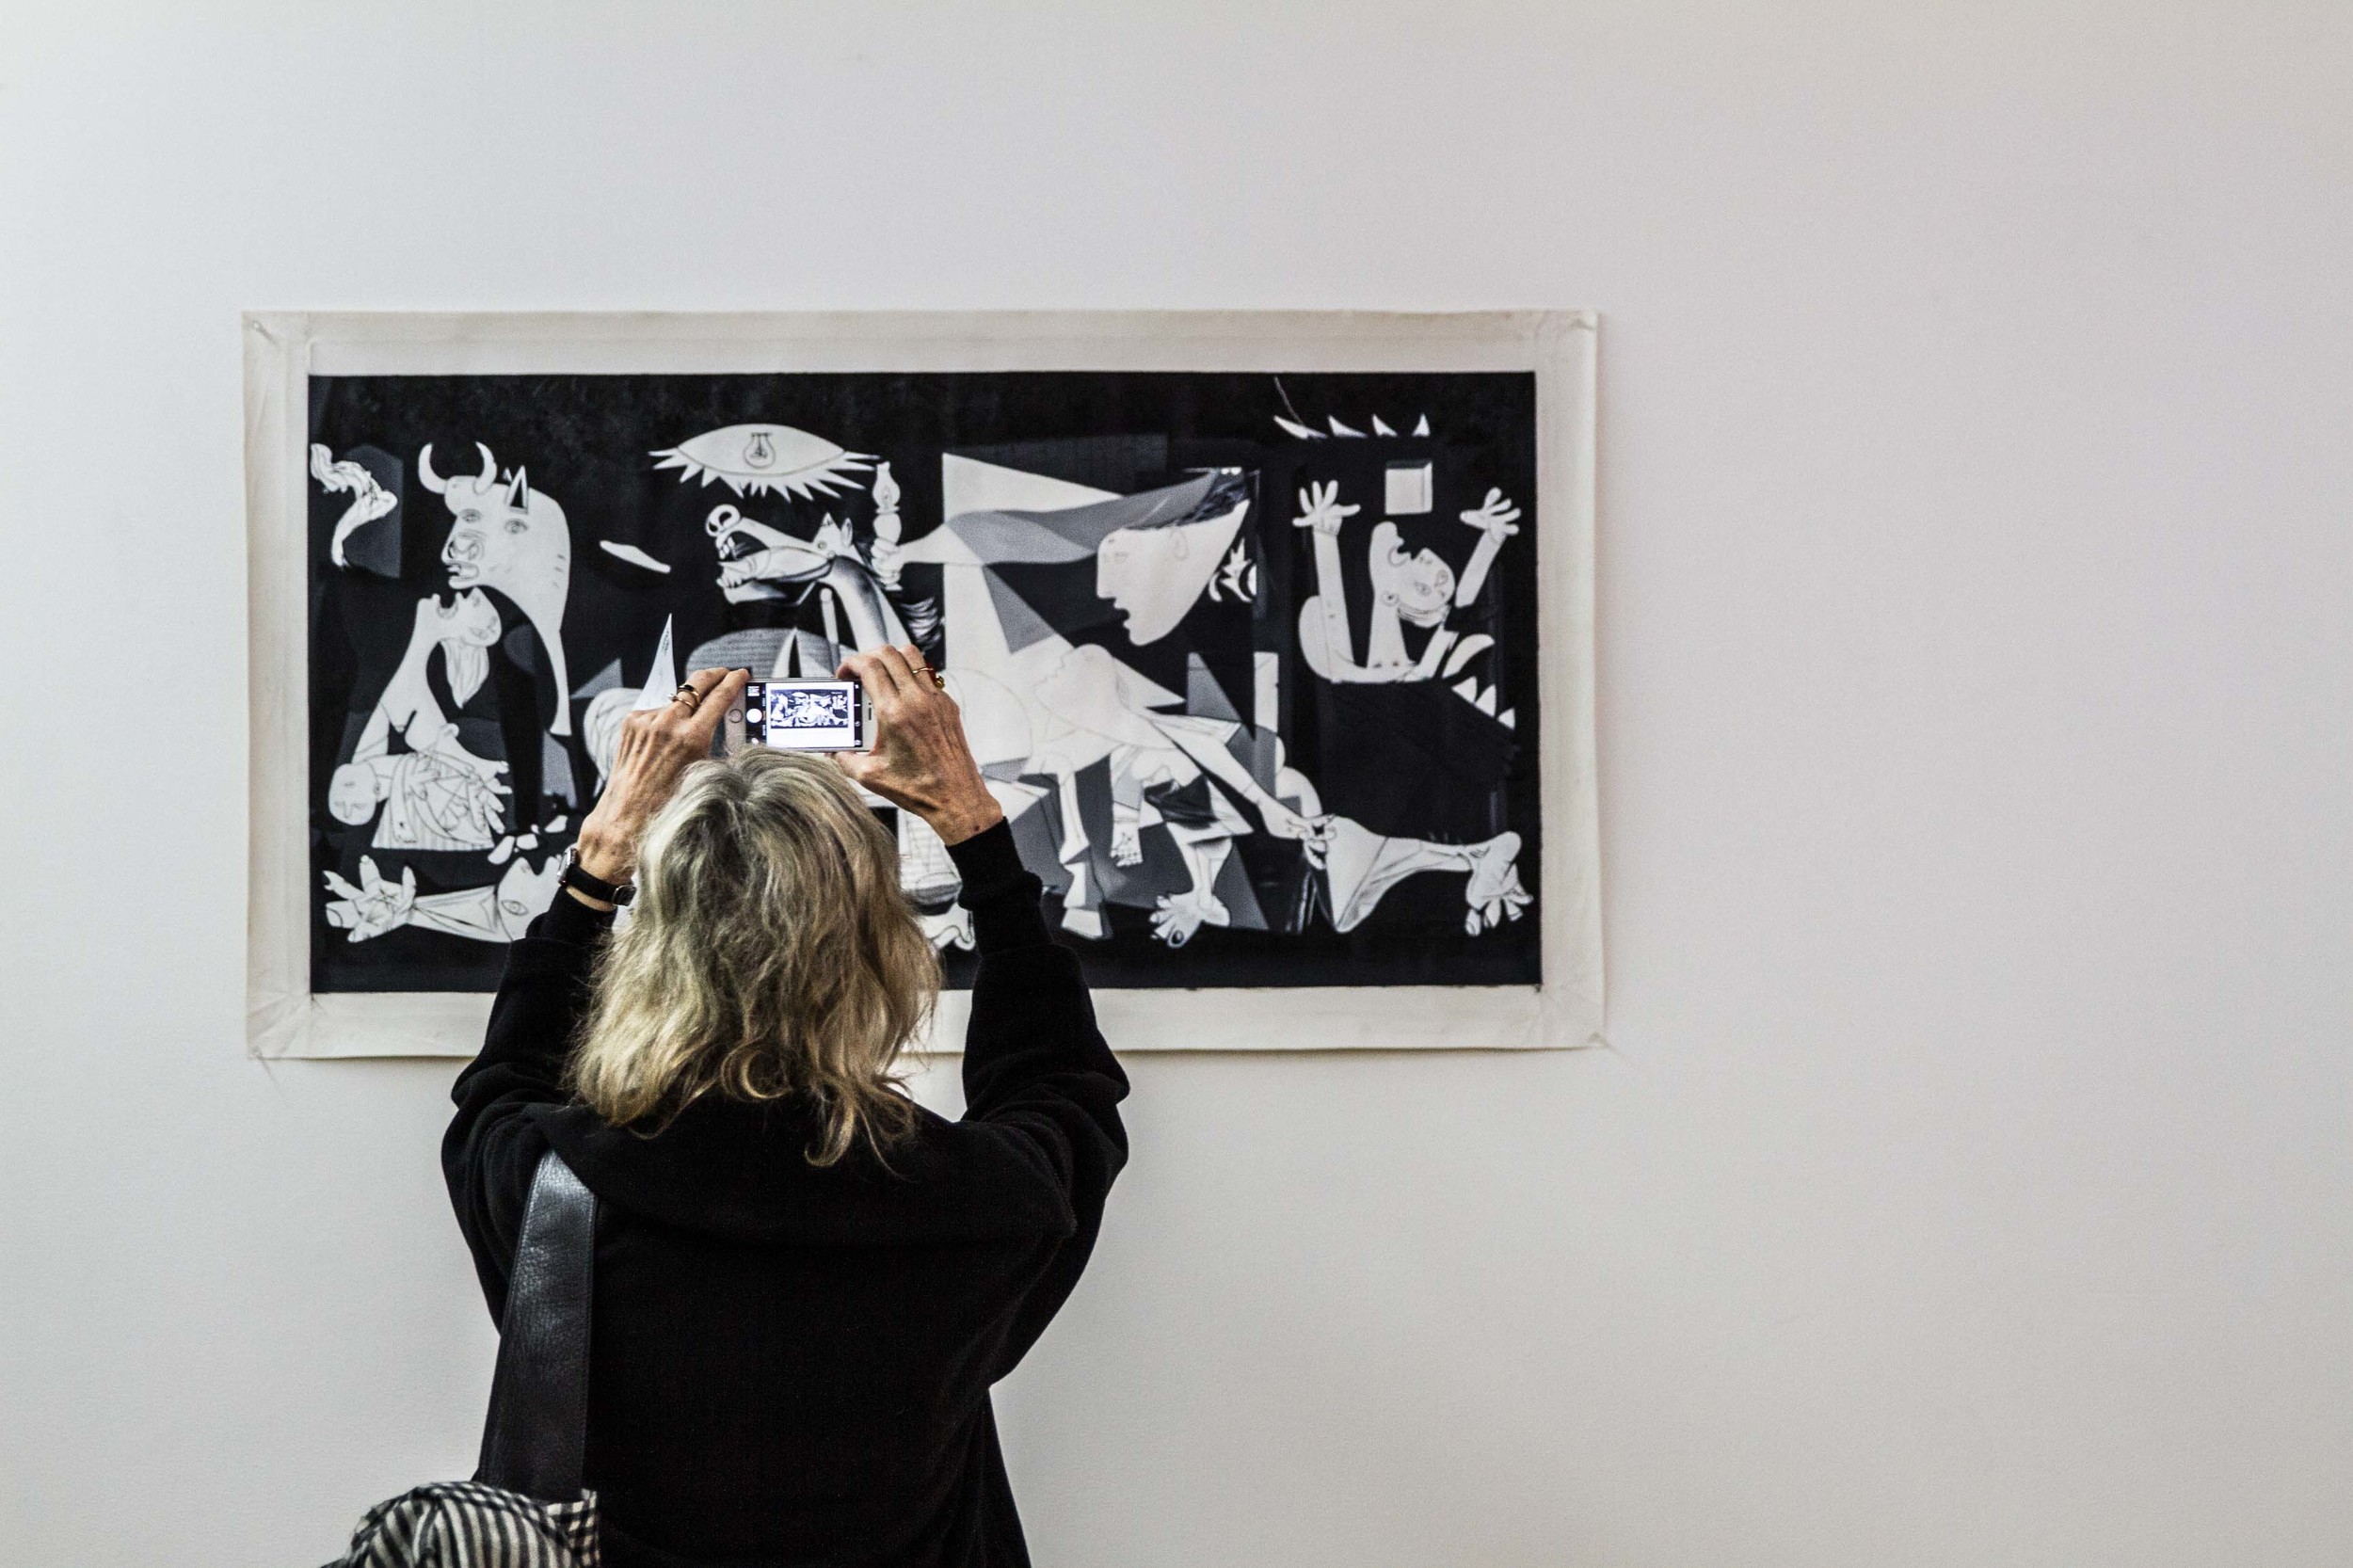   Artsheaven.com   painting-8598 (  Guernica)&nbsp;&nbsp; 2016 Installation view,&nbsp; The Fraud Complex ,&nbsp;West Space, Melbourne, 2016 oil painting reproduction on canvas Photograph: Alan Weedon. 